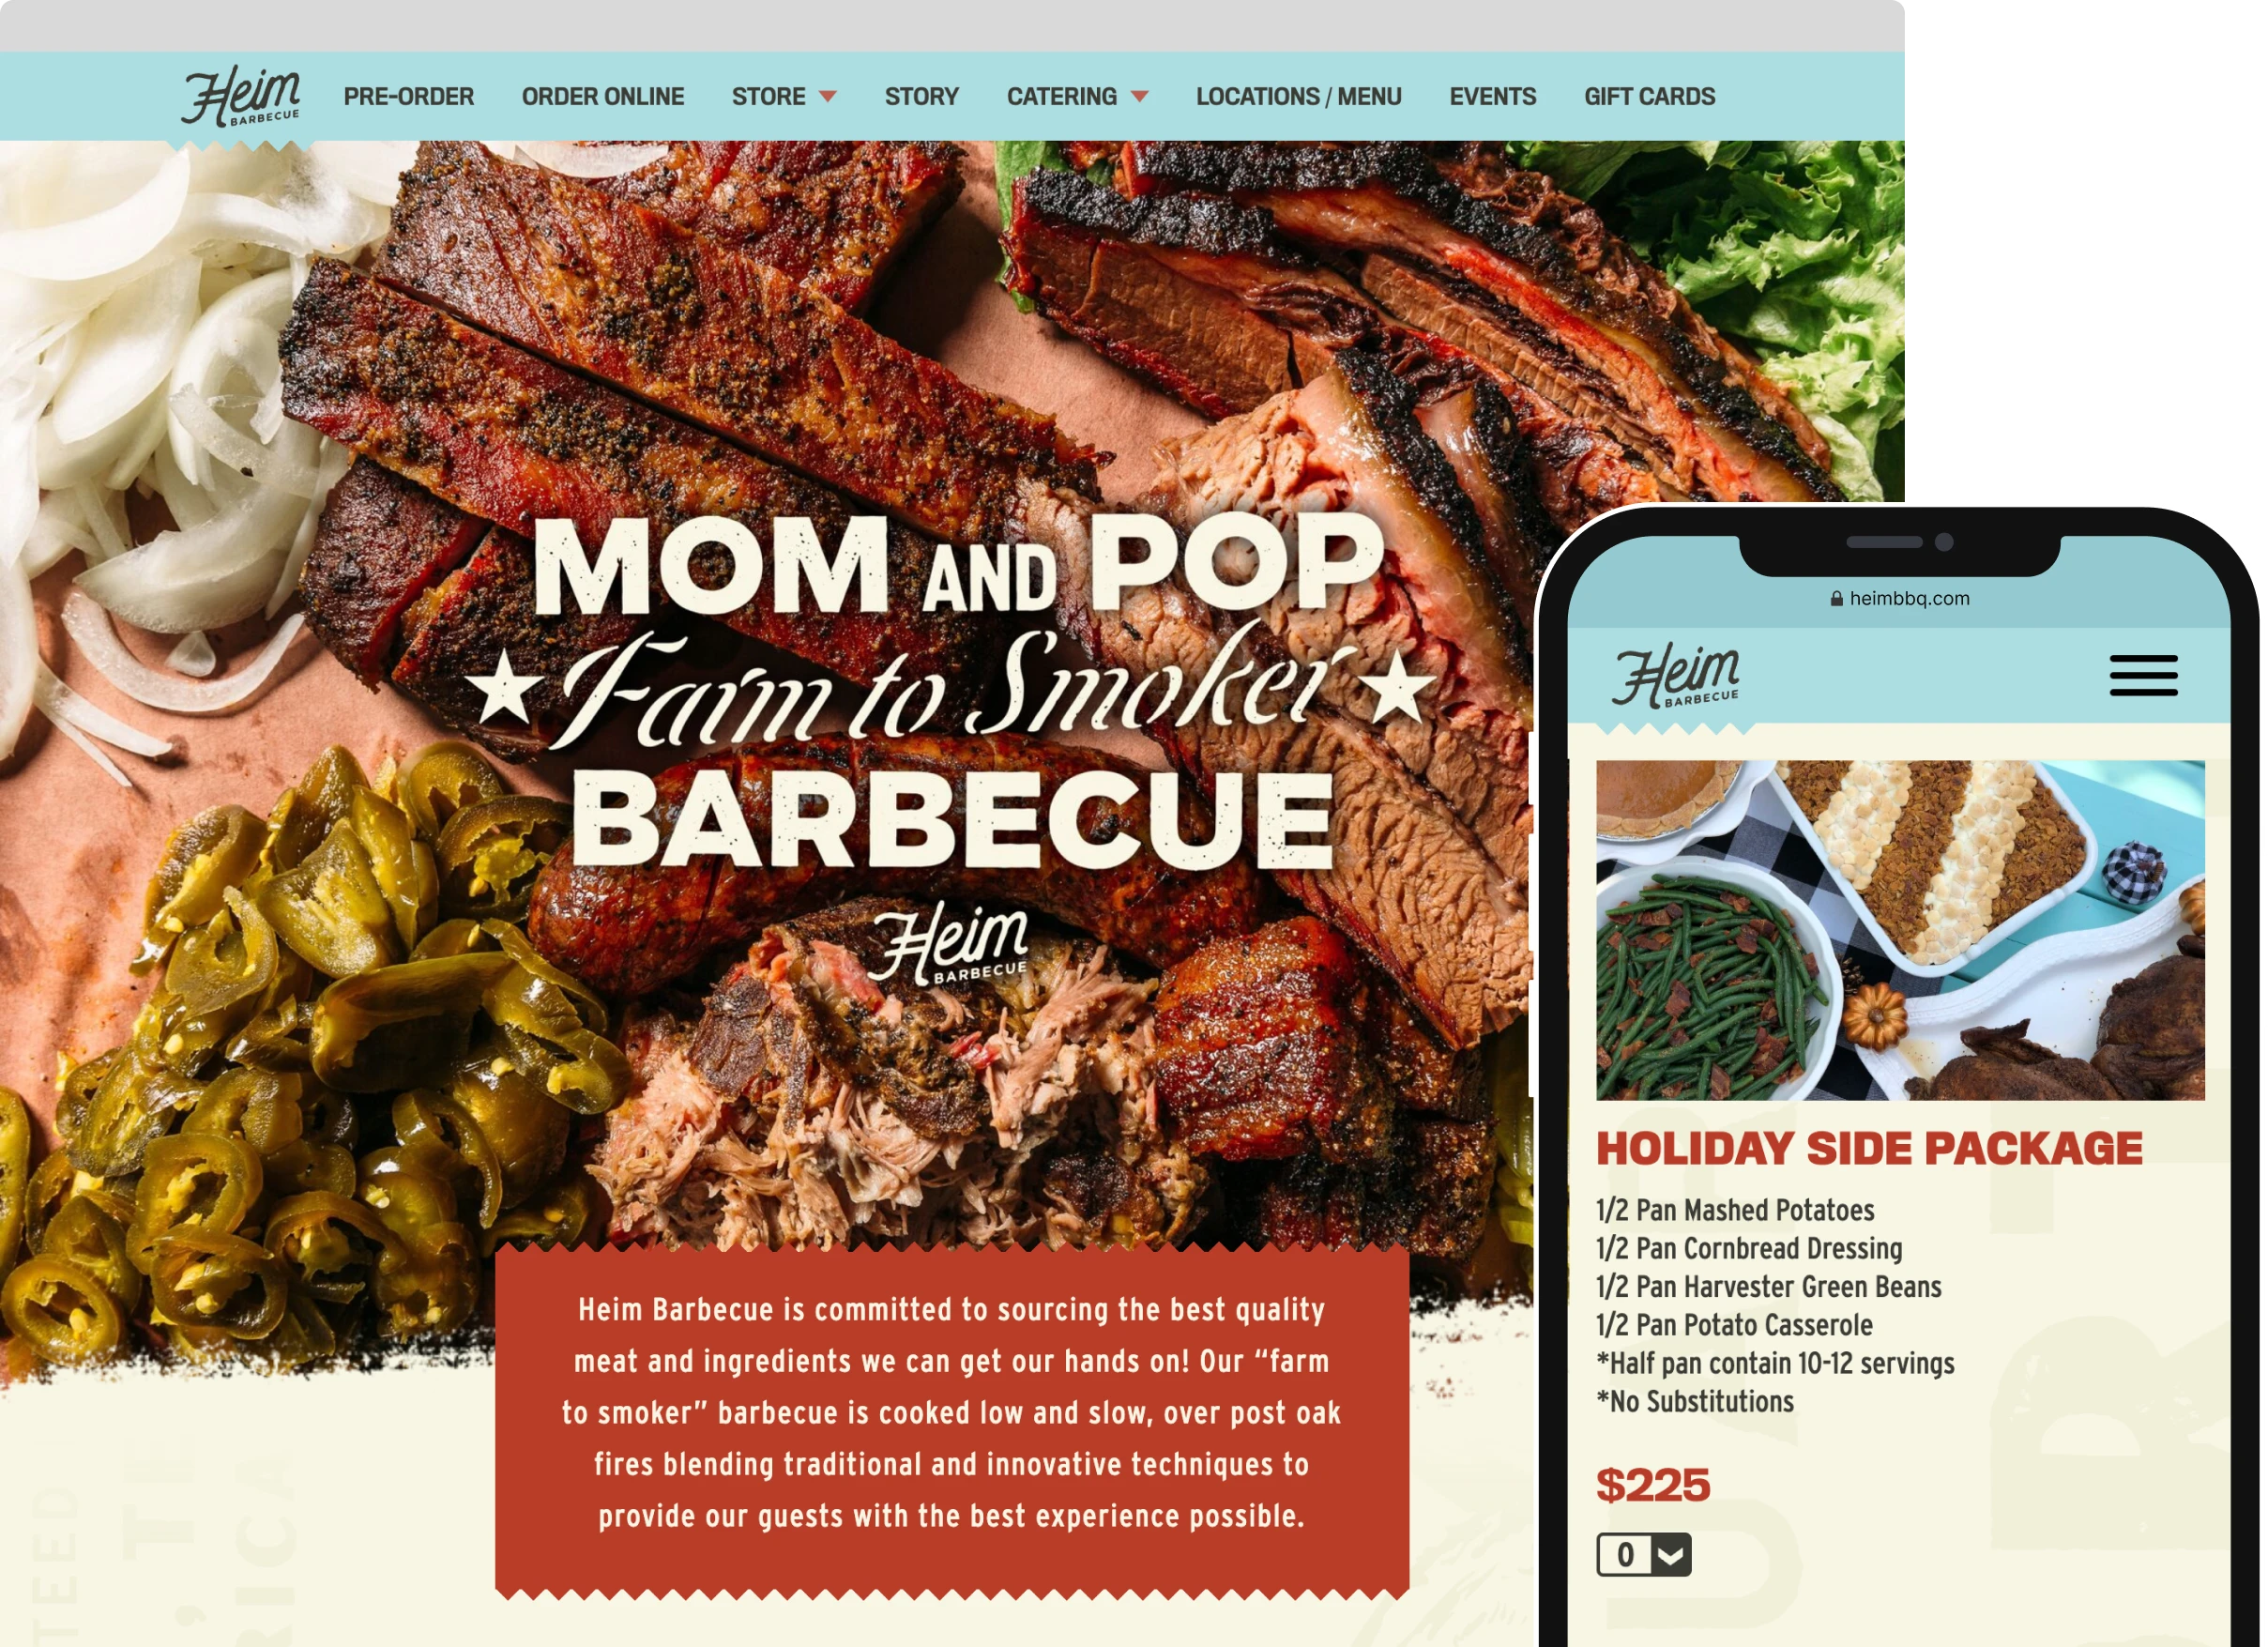 A desktop browser and smartphone displaying the Heim Barbeque website